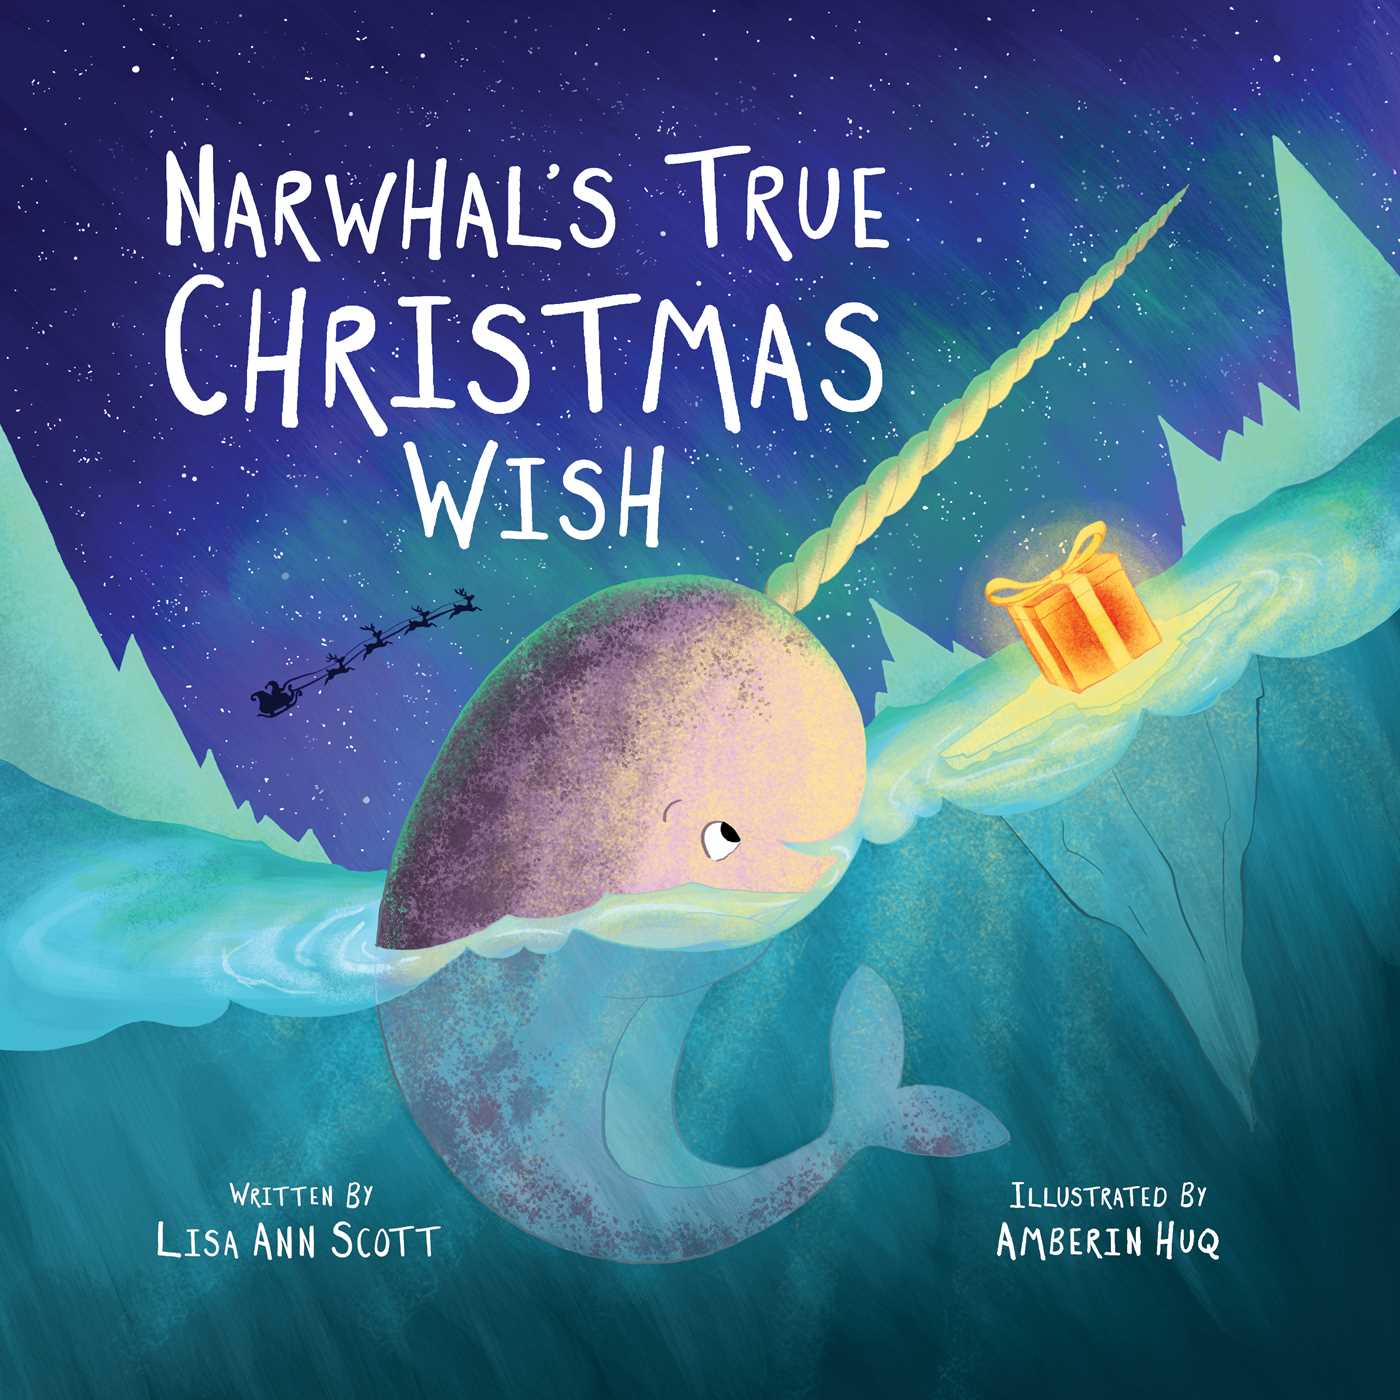 Narwhal's True Christmas Wish